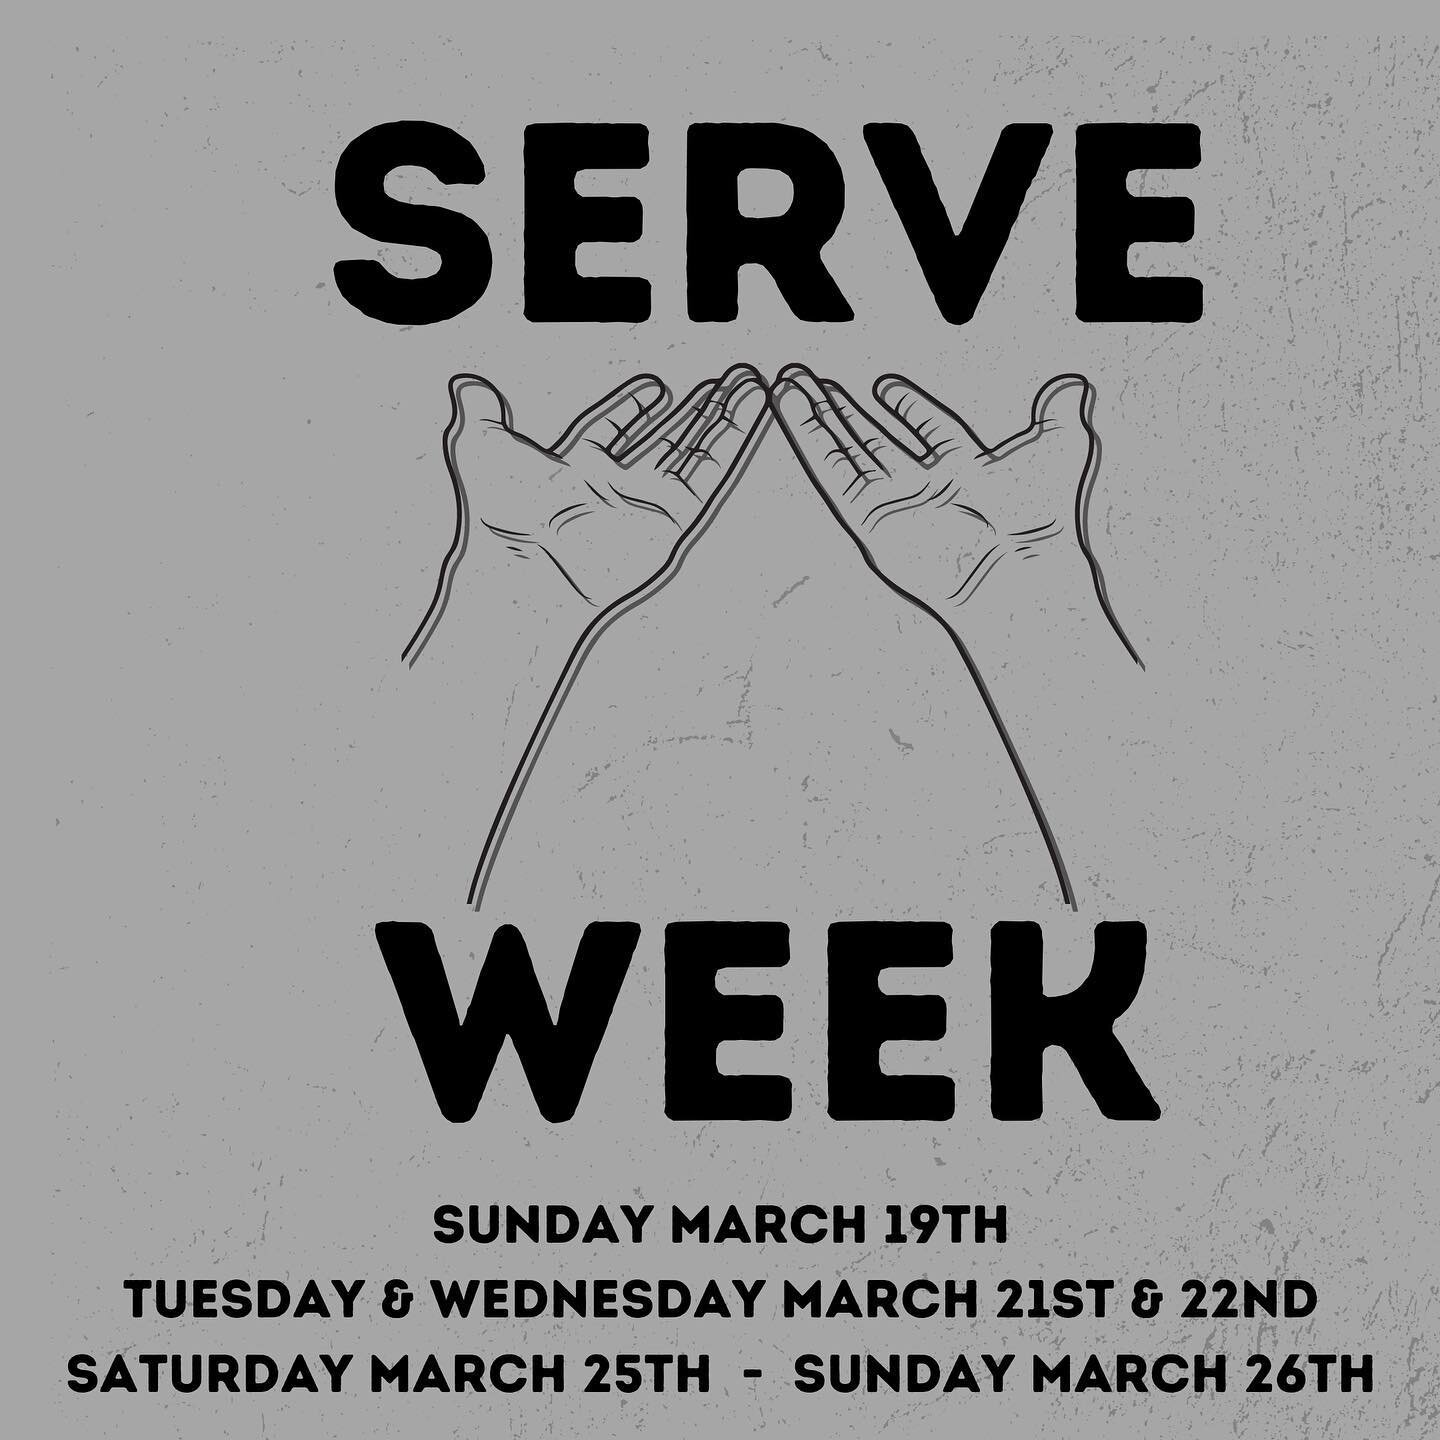 It&rsquo;s Serve Week! Every year we take a week out of other activities and series to focus on what it means to &ldquo;humbly serve one another in love&rdquo; (Gal. 5:13). We also give students many opportunities to actively and practically serve th